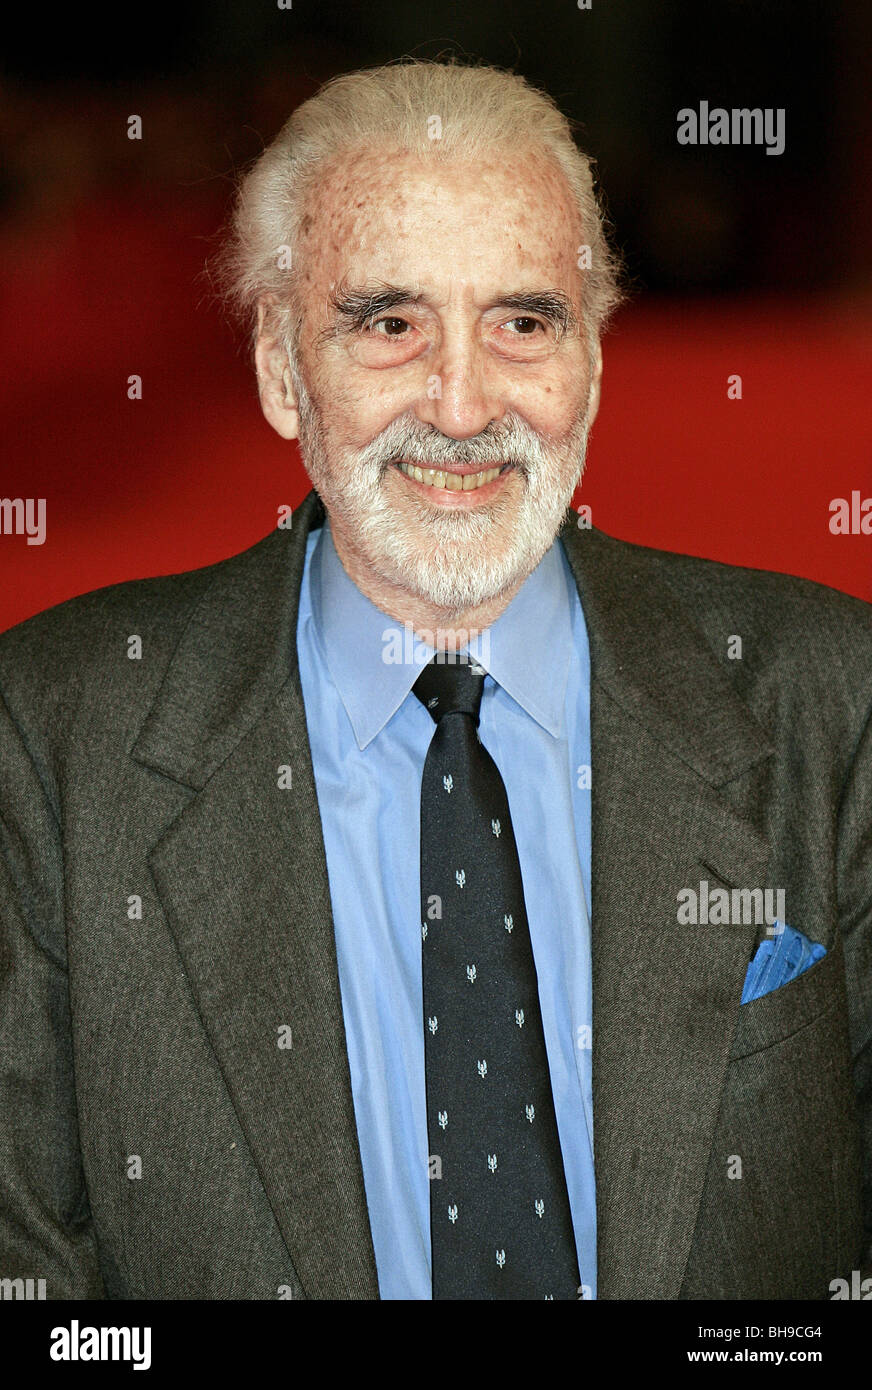 CHRISTOPHER LEE TRIAGE PREMIERE AND OPENING NIGHT AUDITORIUM PARCO DELLA MUSICA ROME ITALY 15 October 2009 Stock Photo